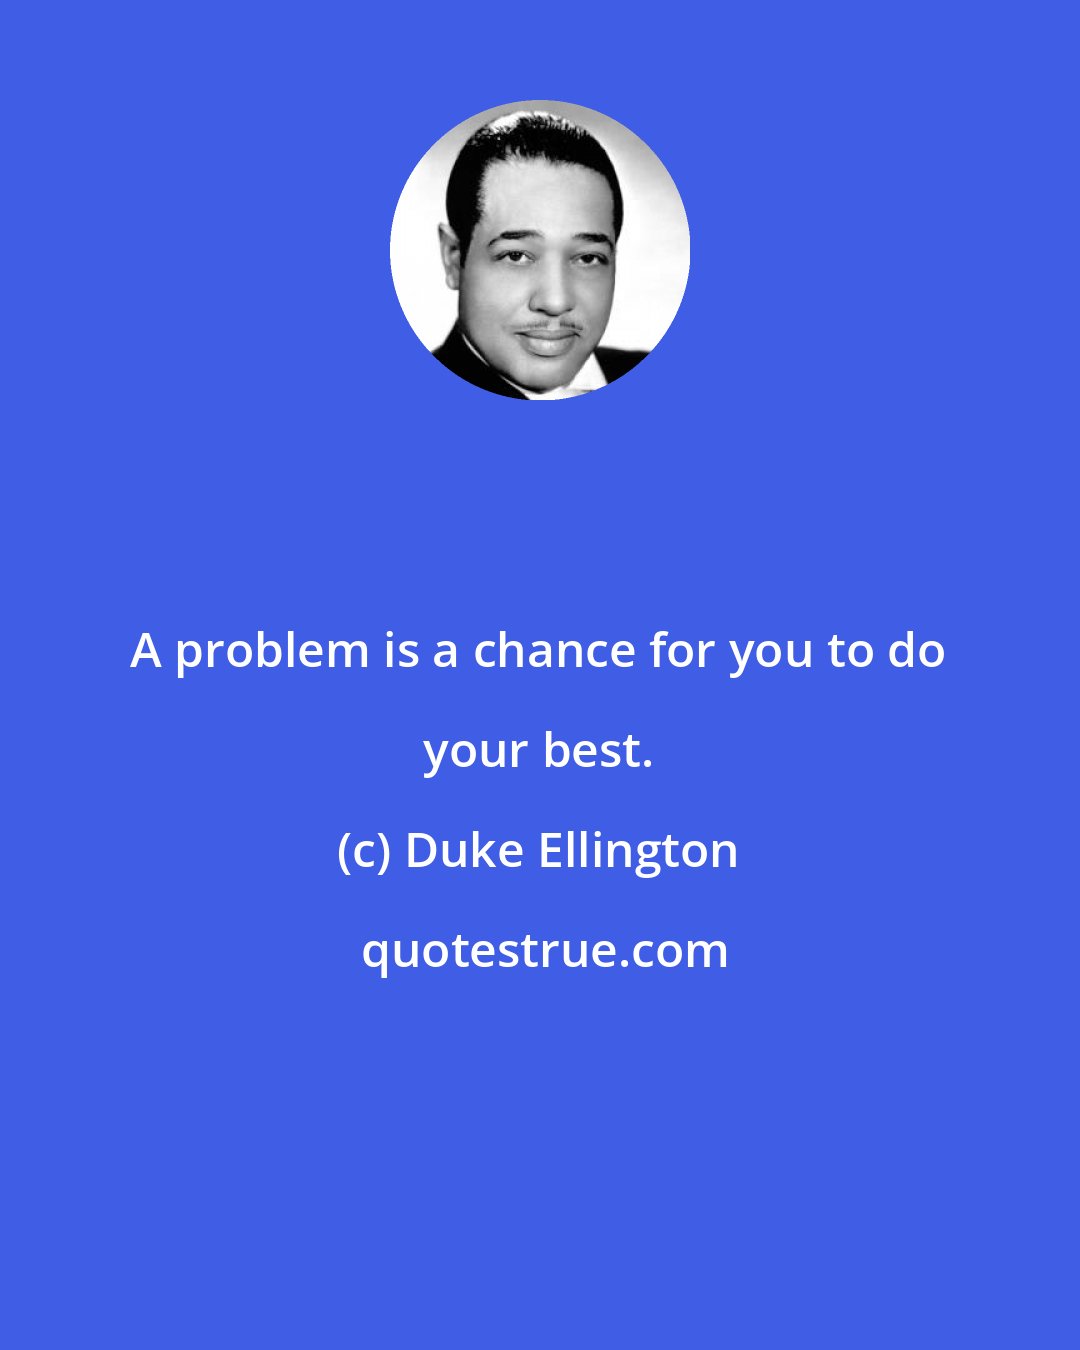 Duke Ellington: A problem is a chance for you to do your best.